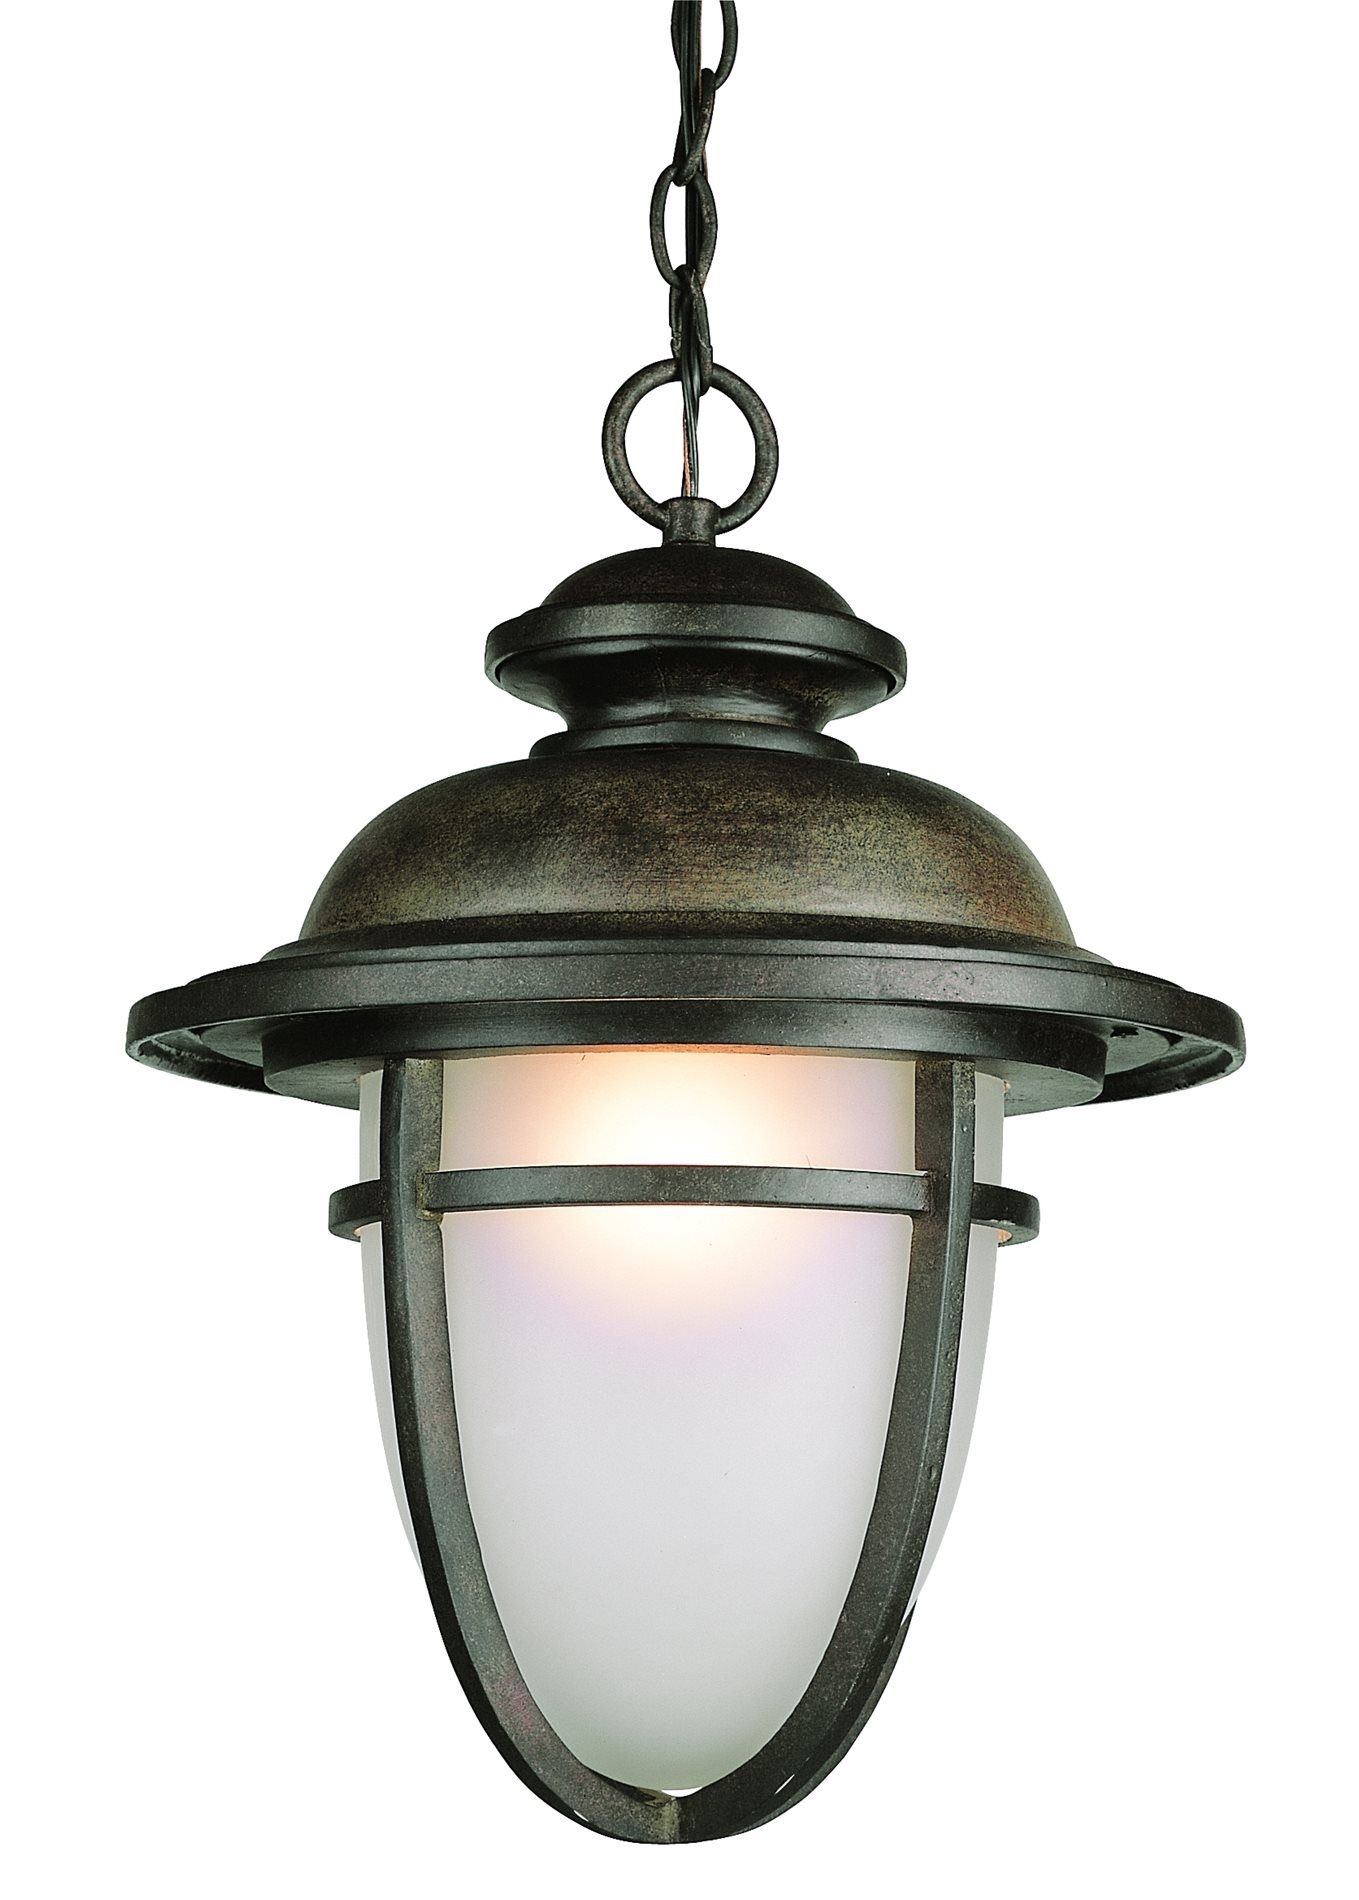 Craftsman And Traditional Detailing Draw The Eye In To This Trans Within Houzz Outdoor Hanging Lights (Photo 2 of 15)